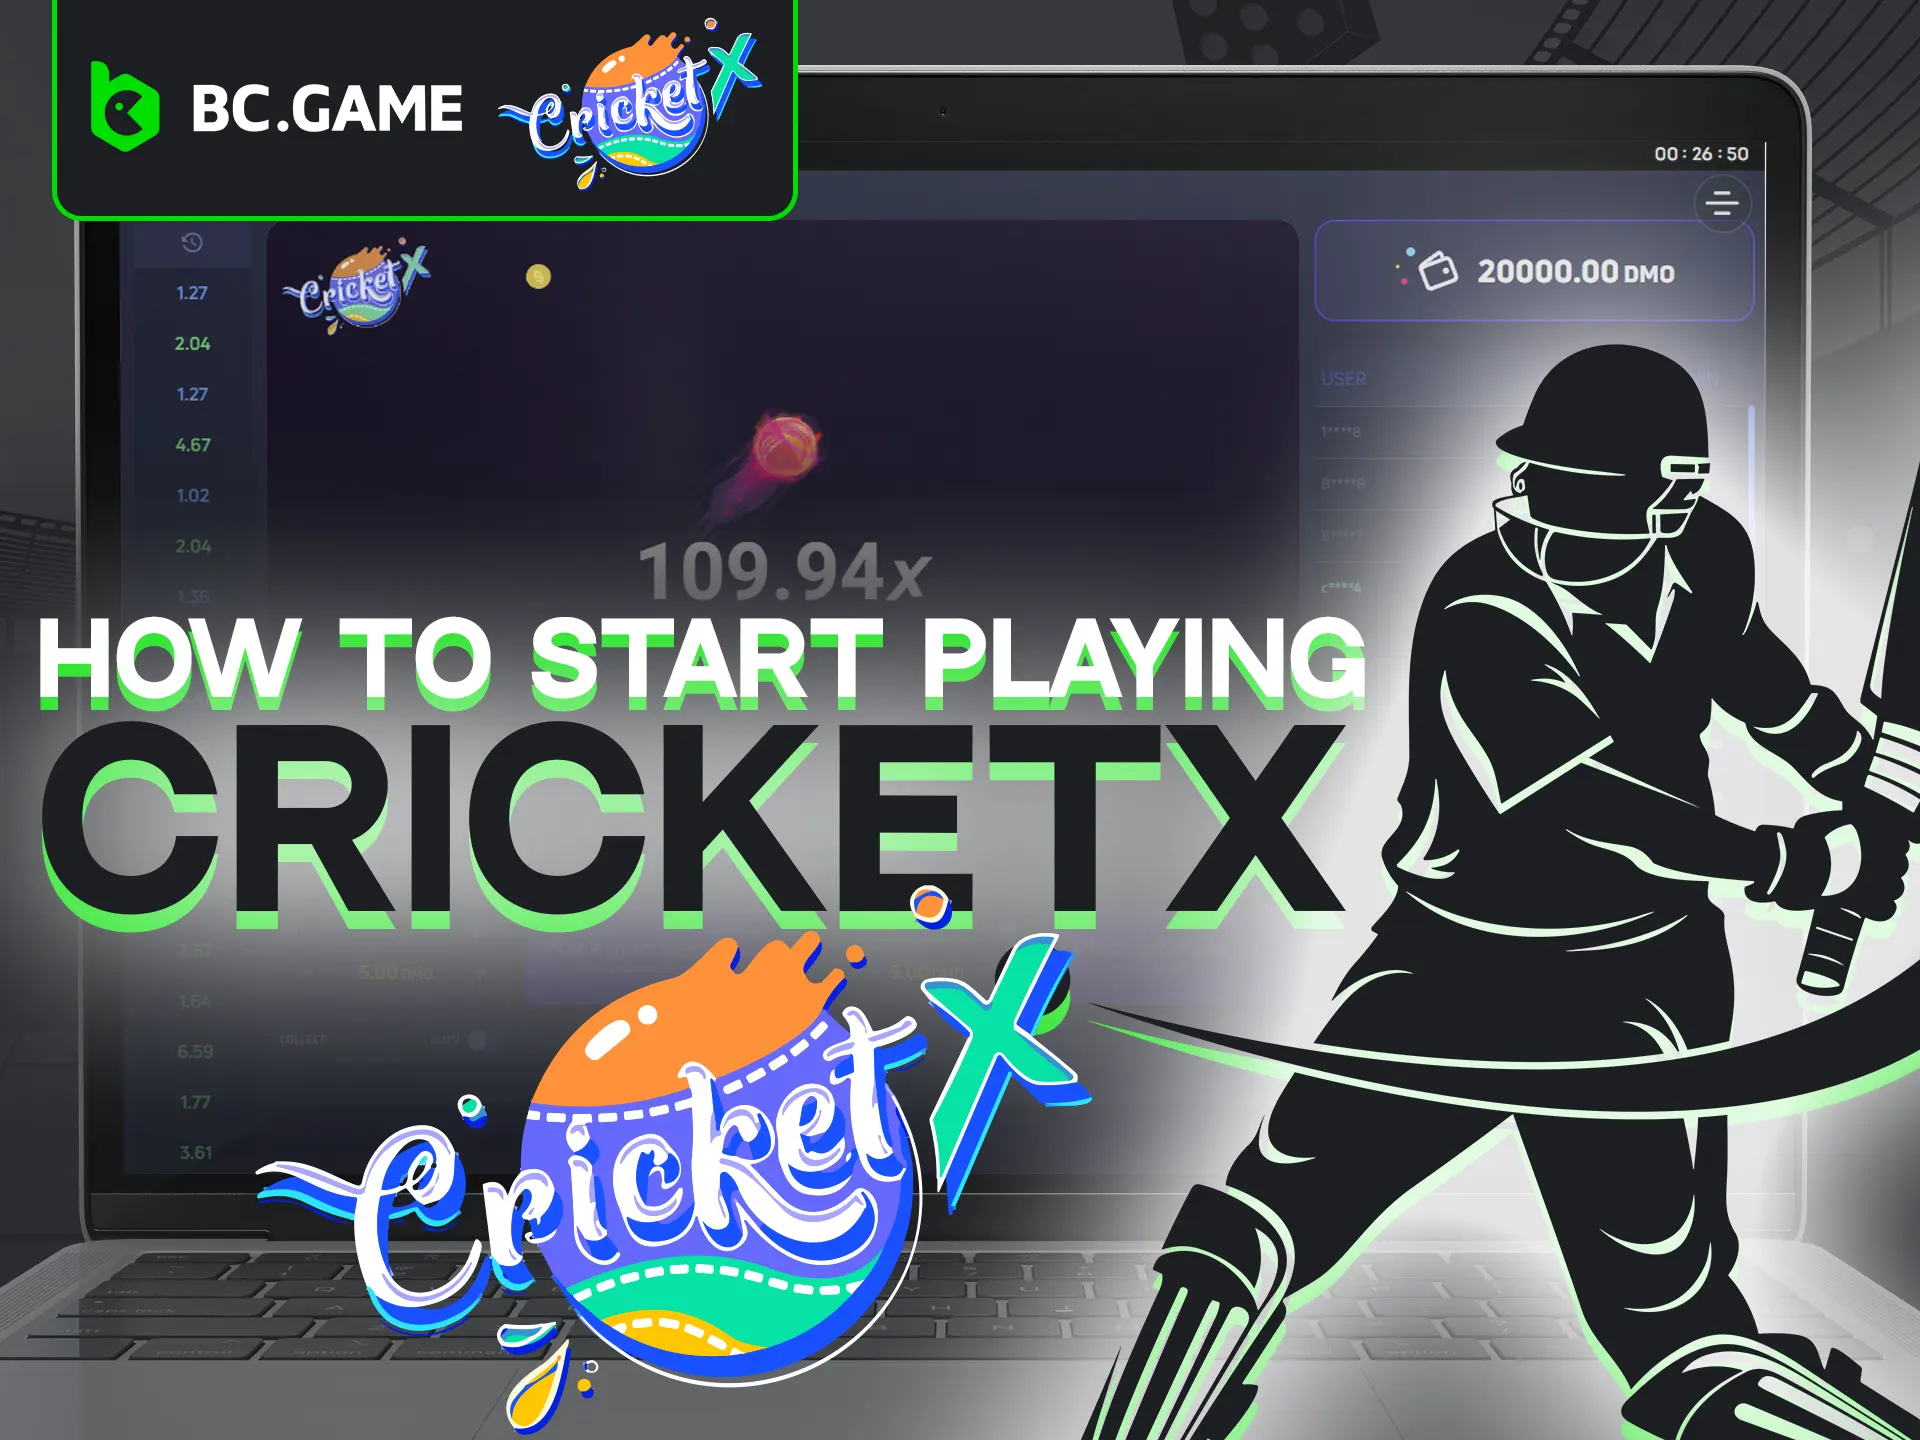 Start playing Cricket X at BC Game by registering and depositing.